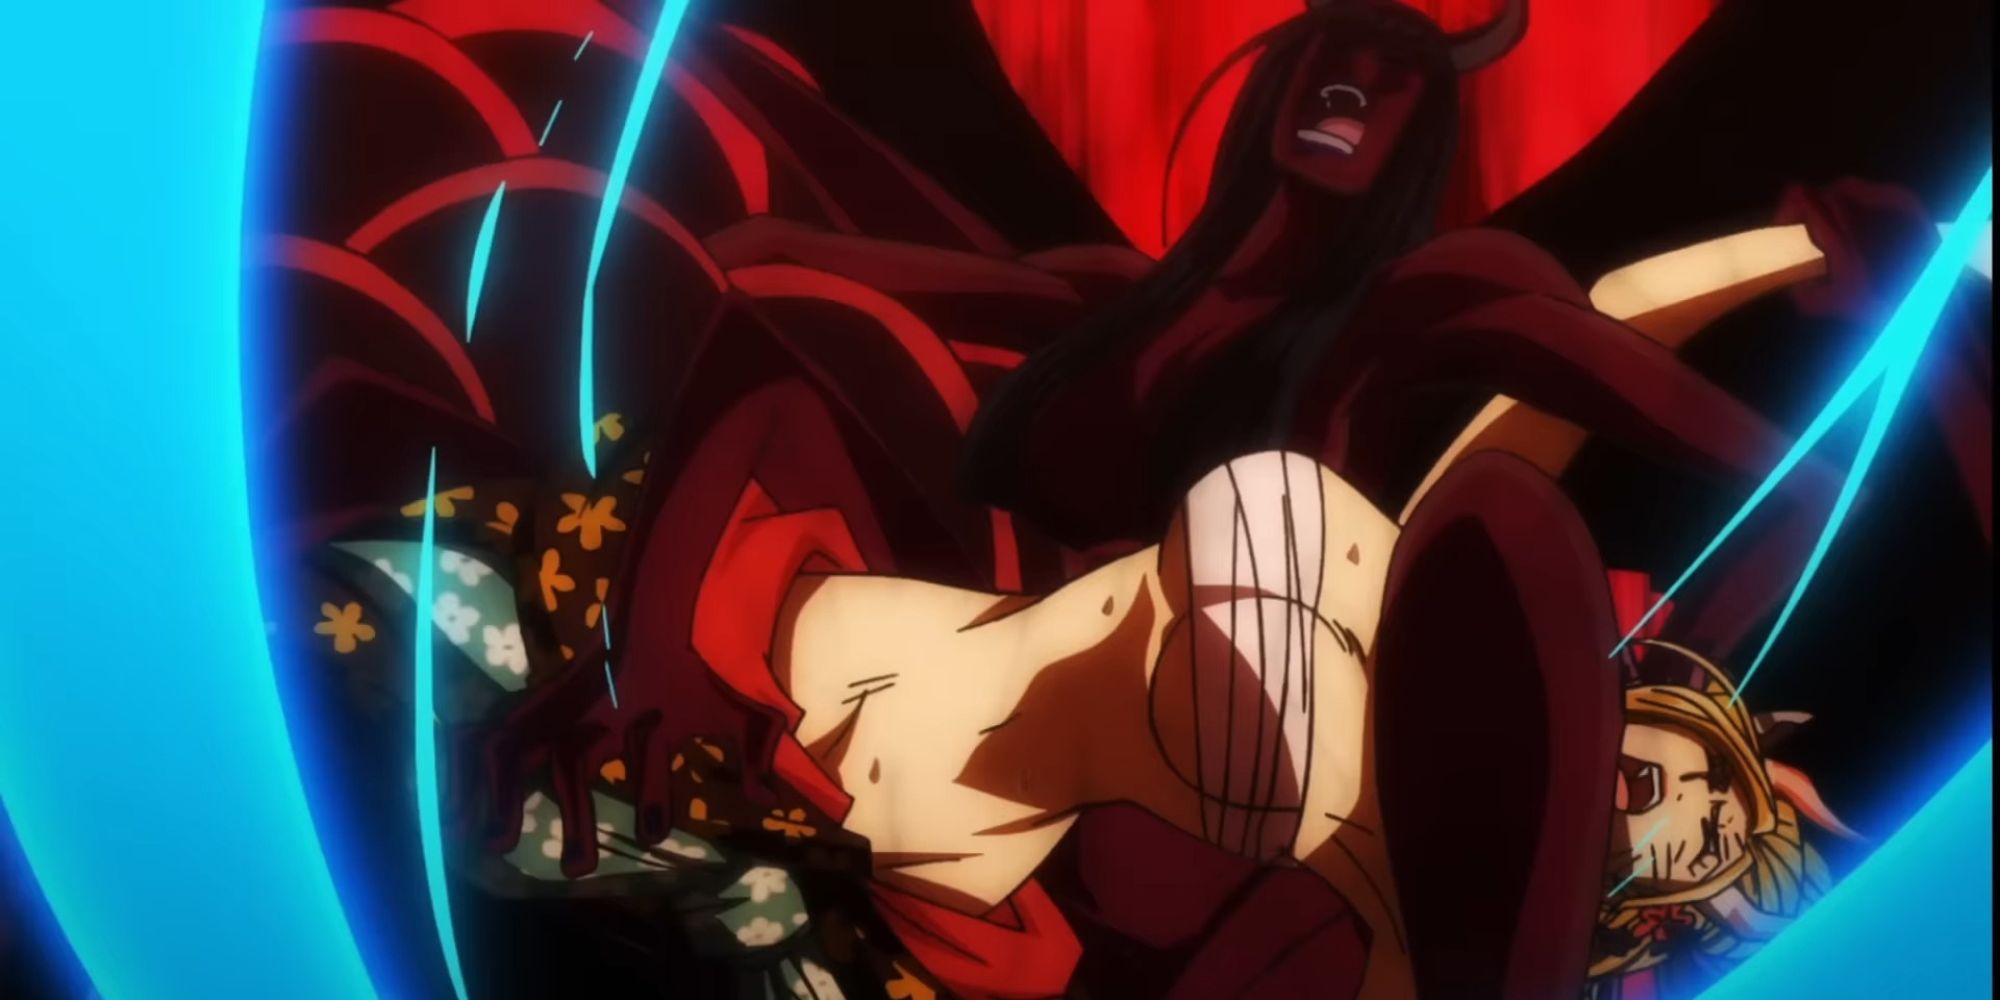 Robin vs Black Maria is one of the best One Piece fights.